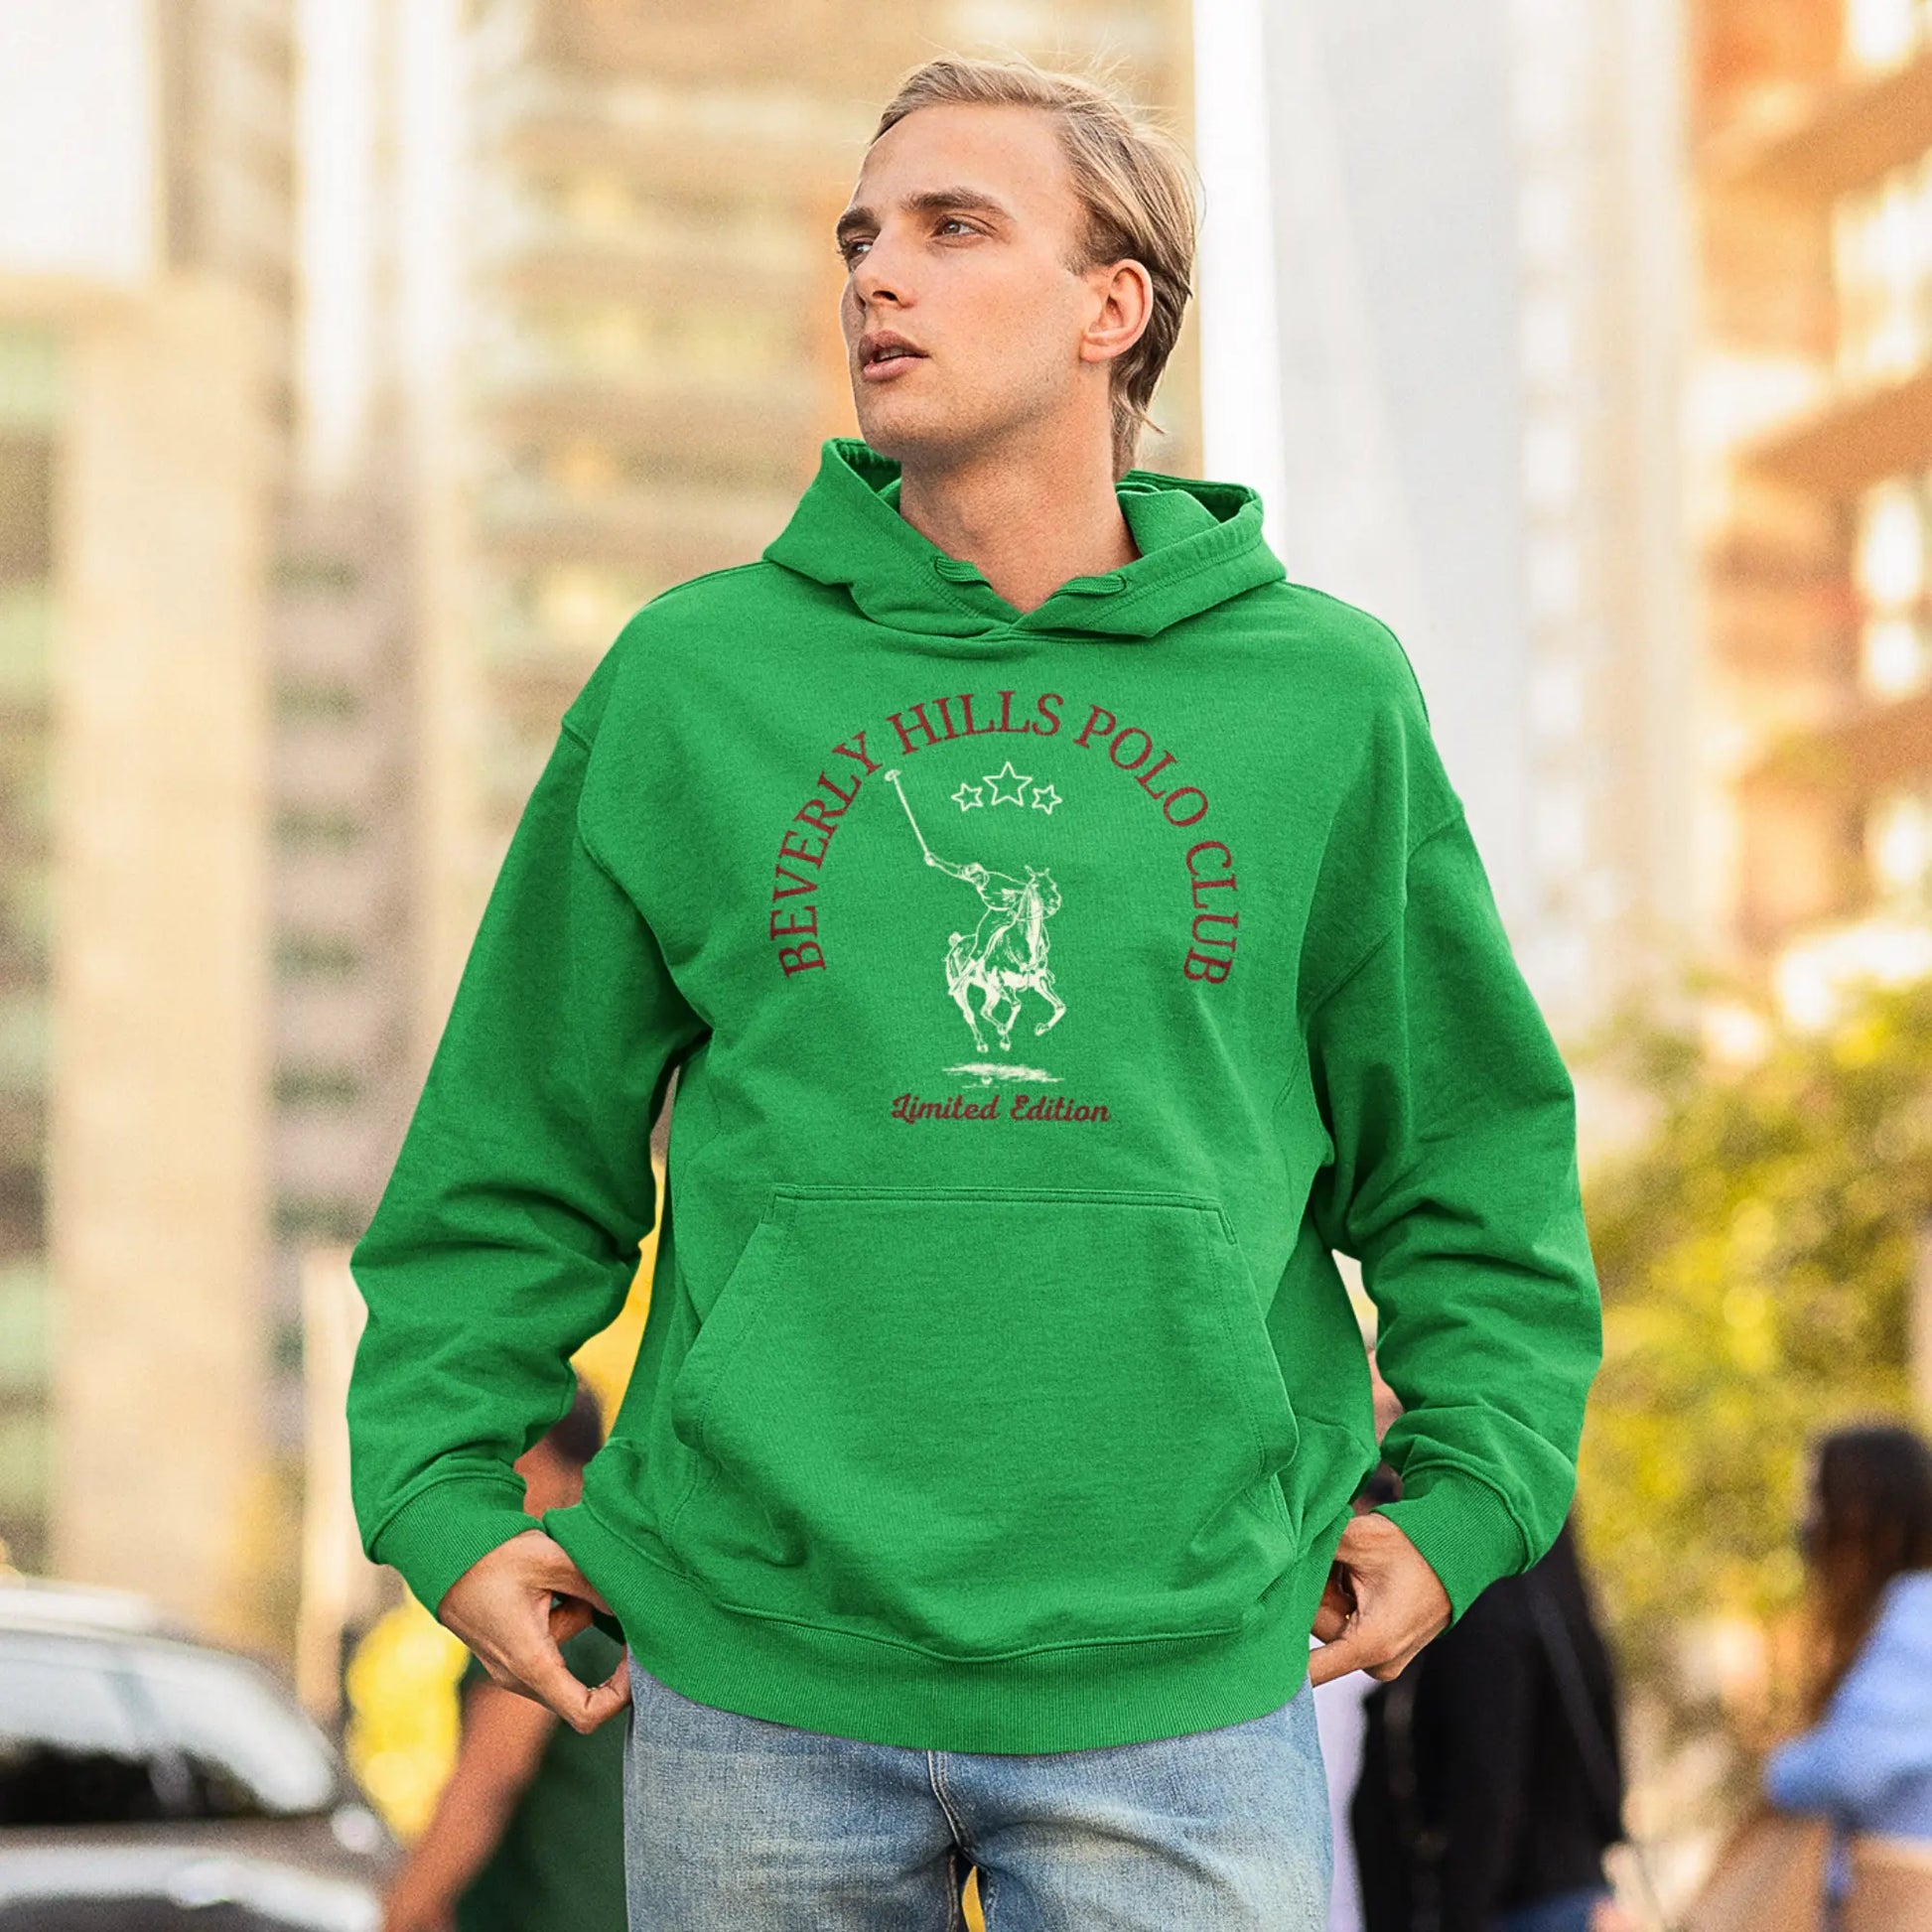 A man with slicked-back blonde hair, gazing thoughtfully into the distance, is wearing a bright green hoodie with 'Beverly Hills Polo Club' and an emblem of a polo player on horseback embroidered on the front, labeled 'Limited Edition'. The vibrant green of the hoodie stands out against the urban backdrop of towering buildings and a busy street.